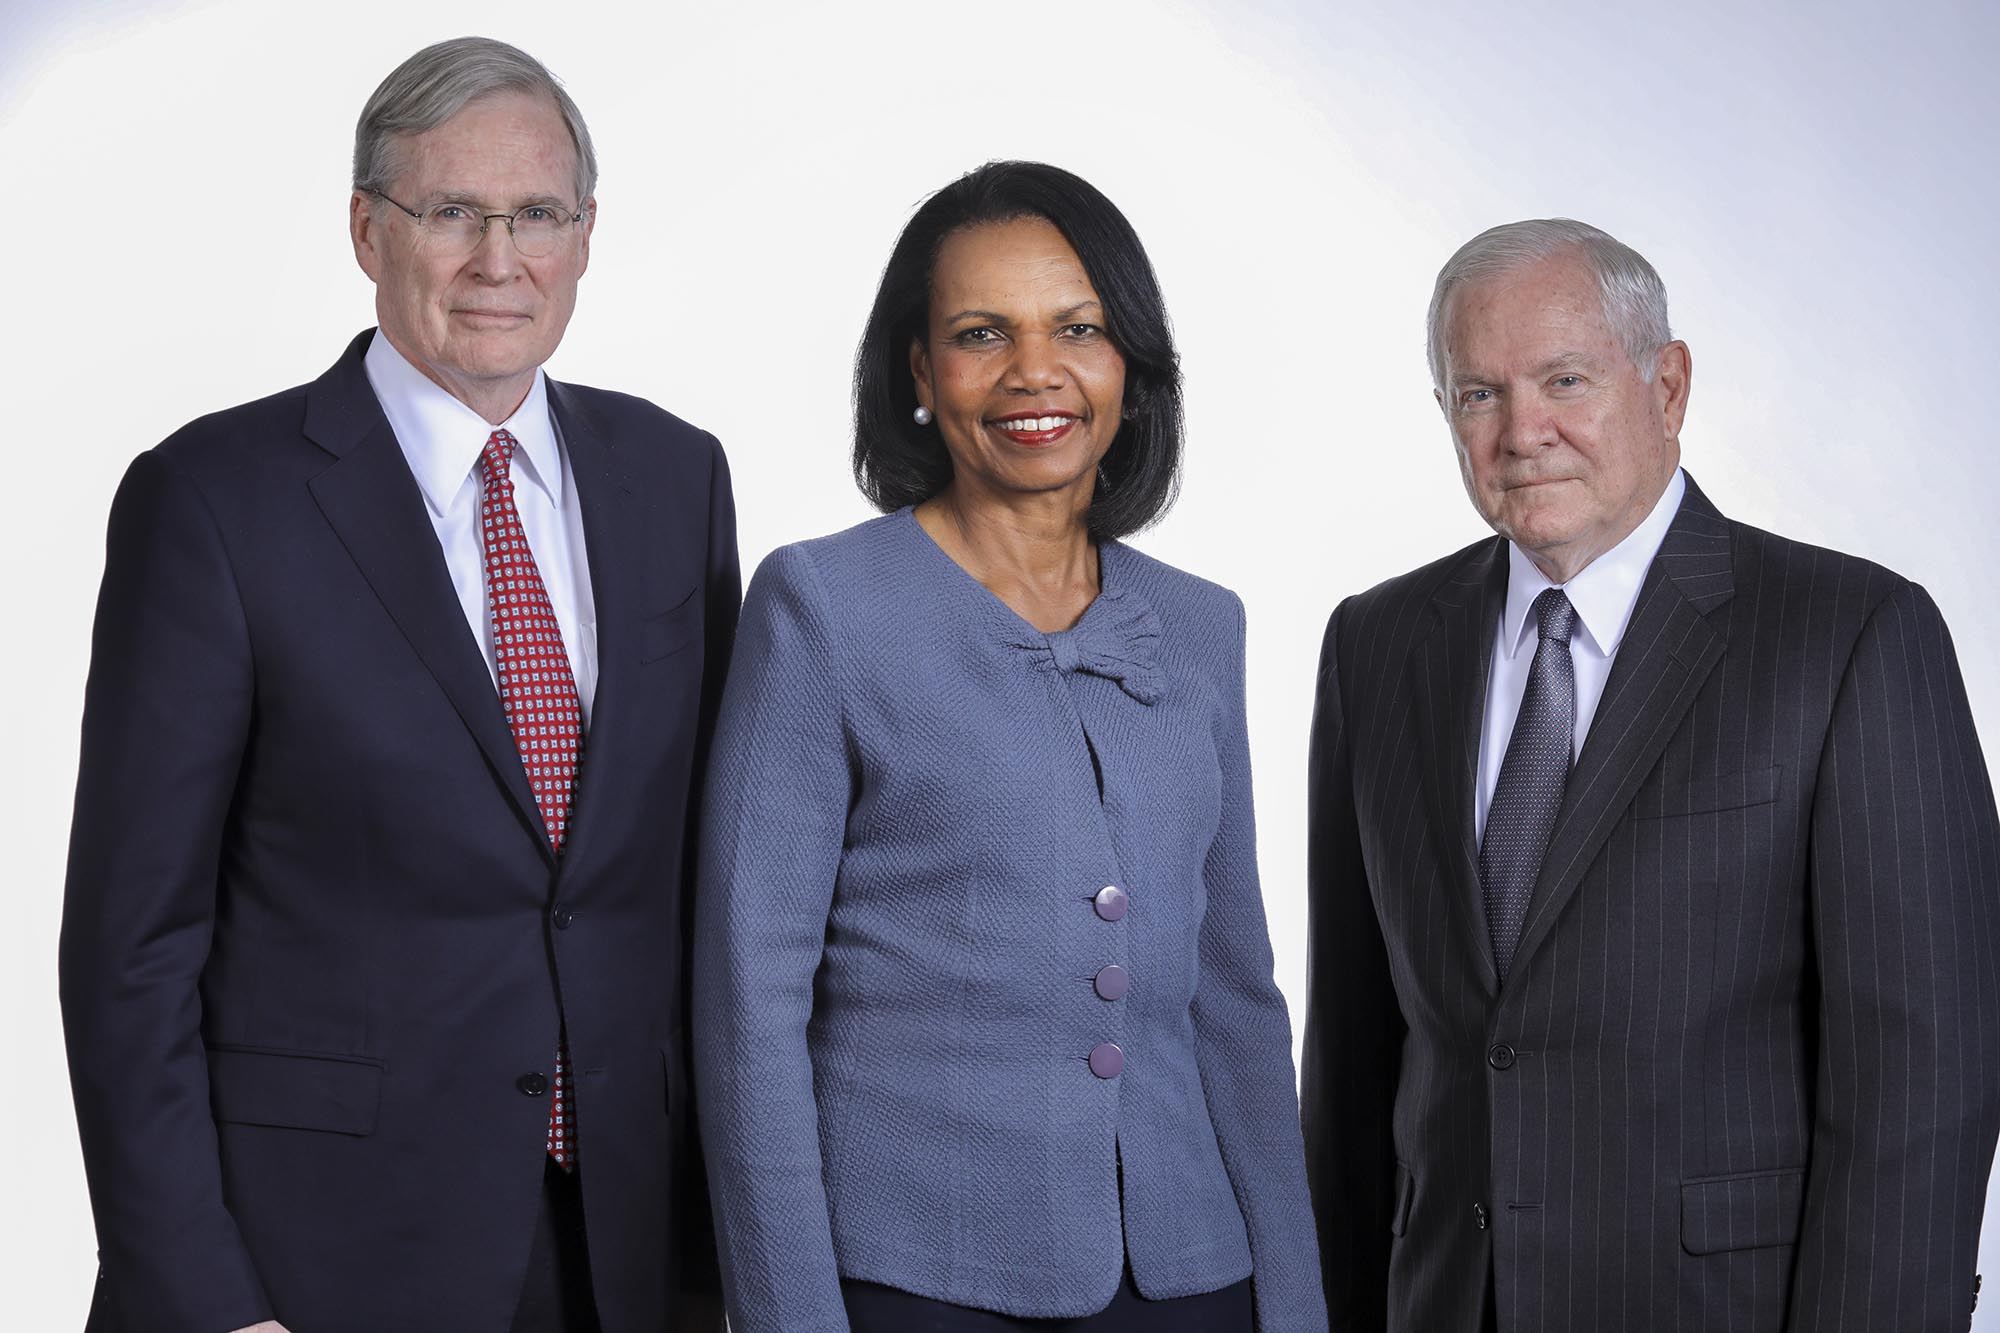 Group picture:  left to right, Stephen Hadley, Condoleezza Rice and Robert Gates